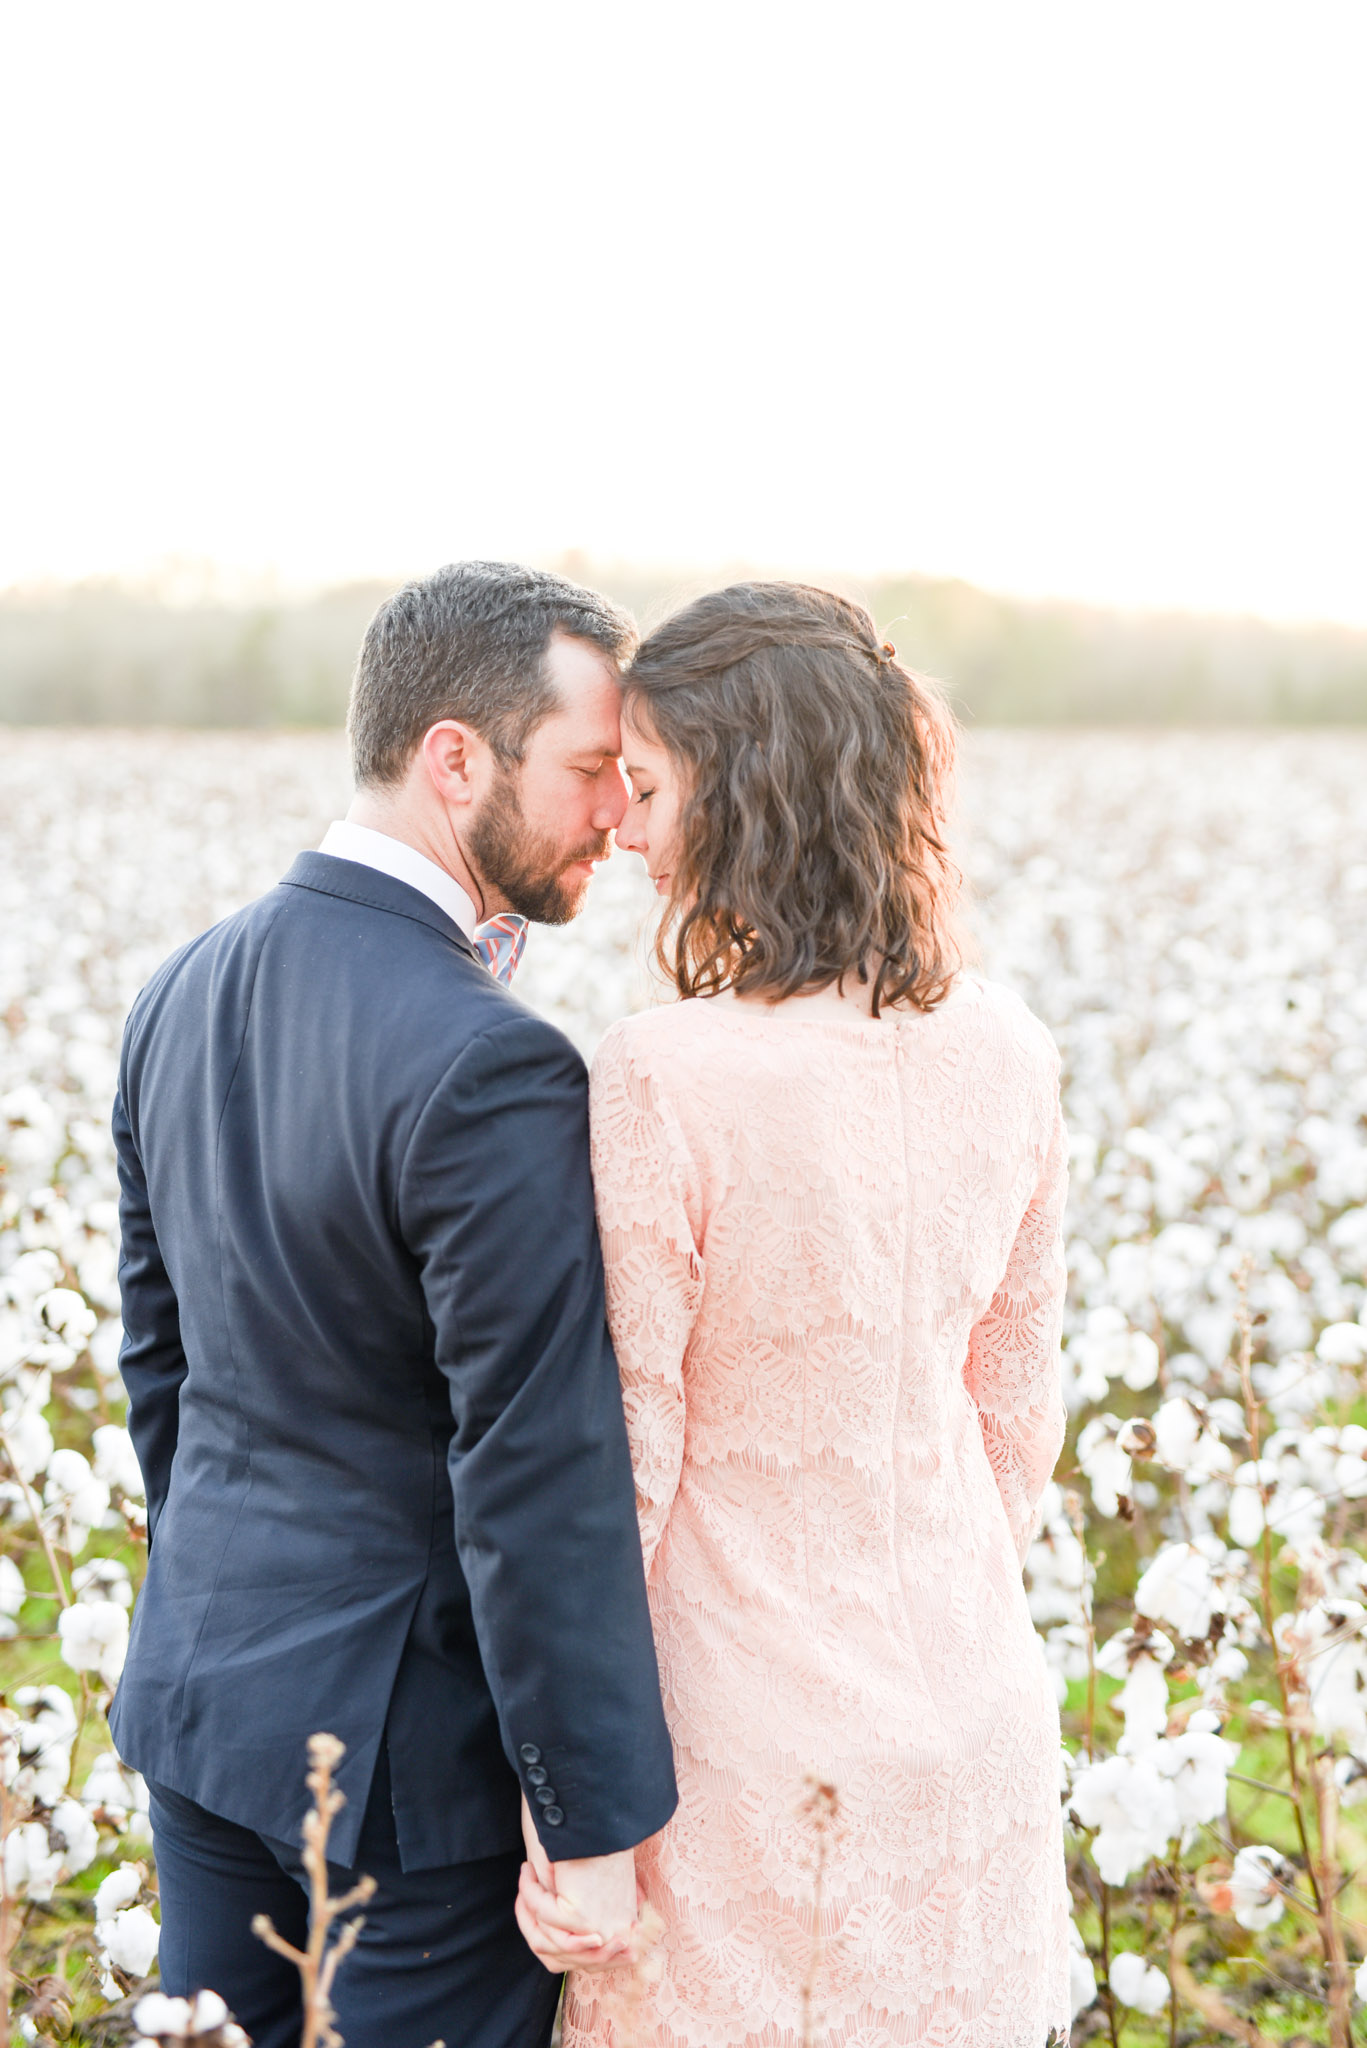 Man and woman snuggle in cotton field at sunset.